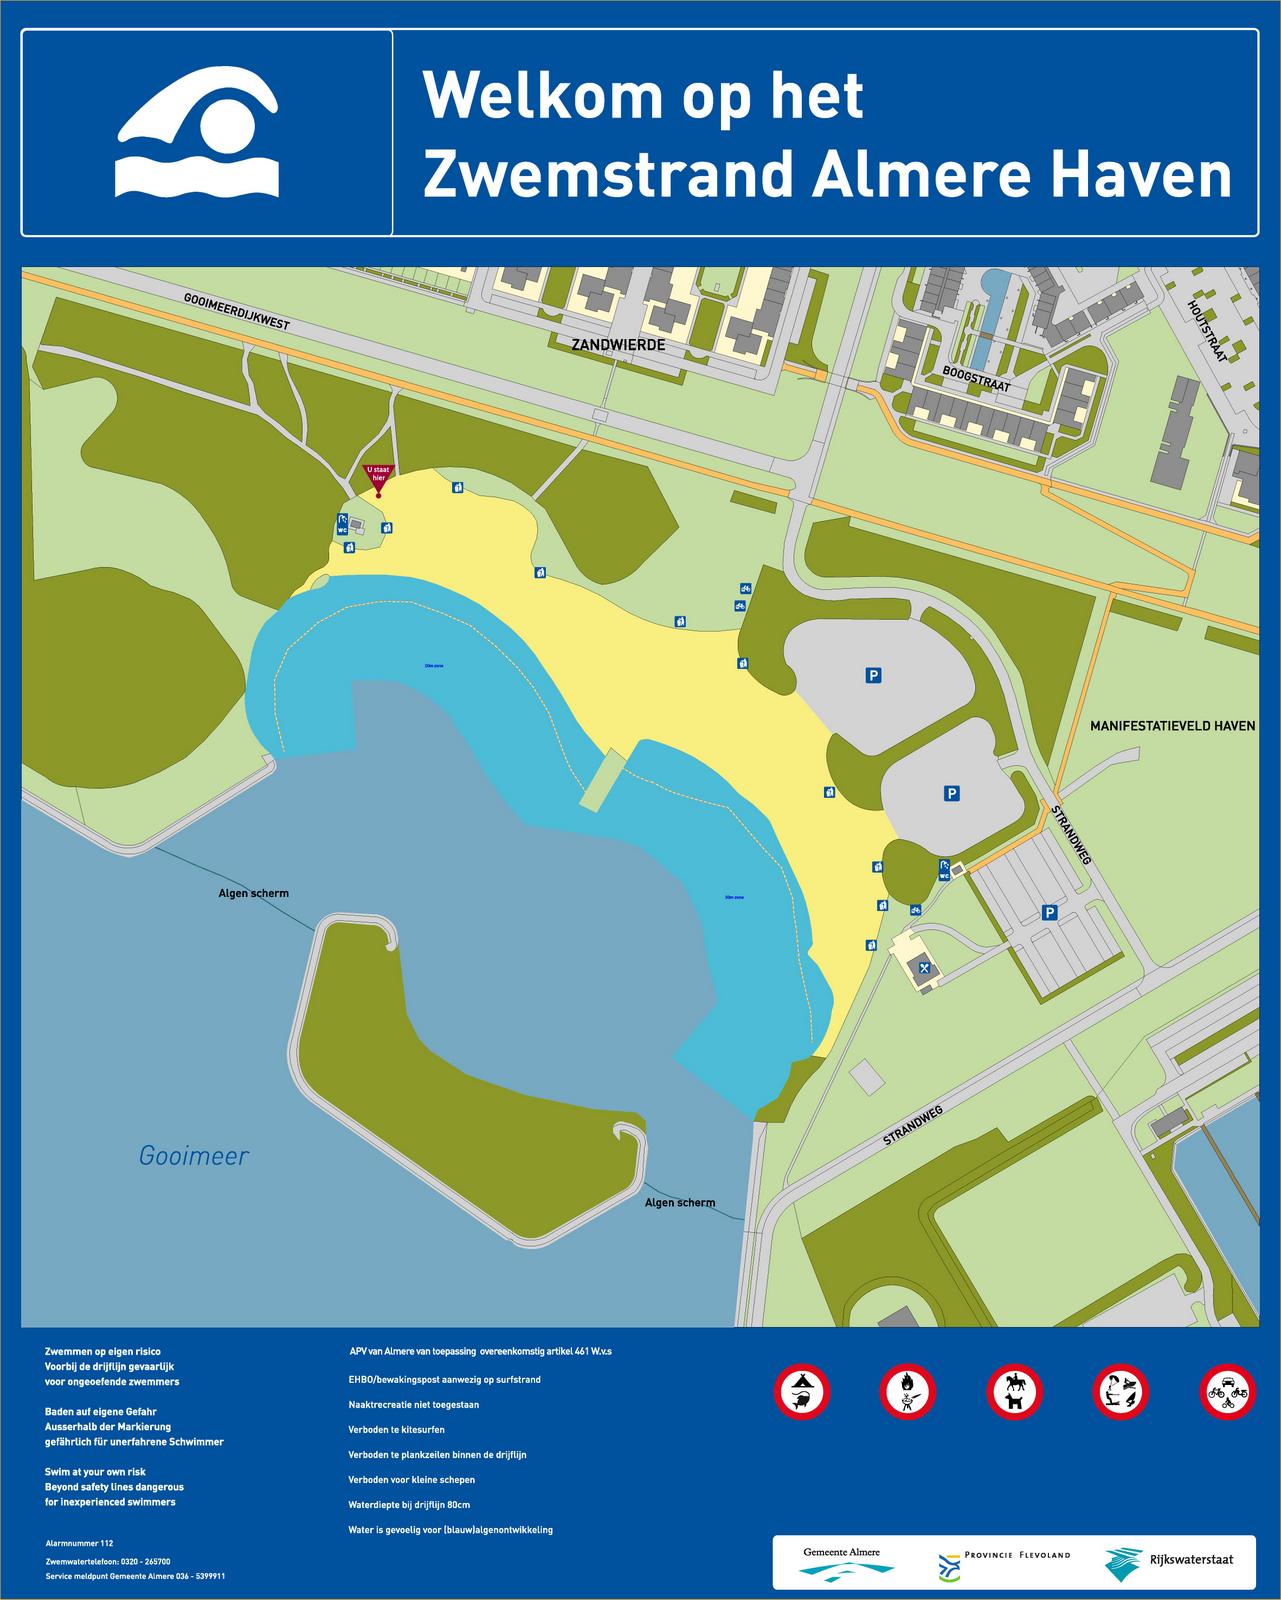 The information board at the swimming location Zwemstrand Almere